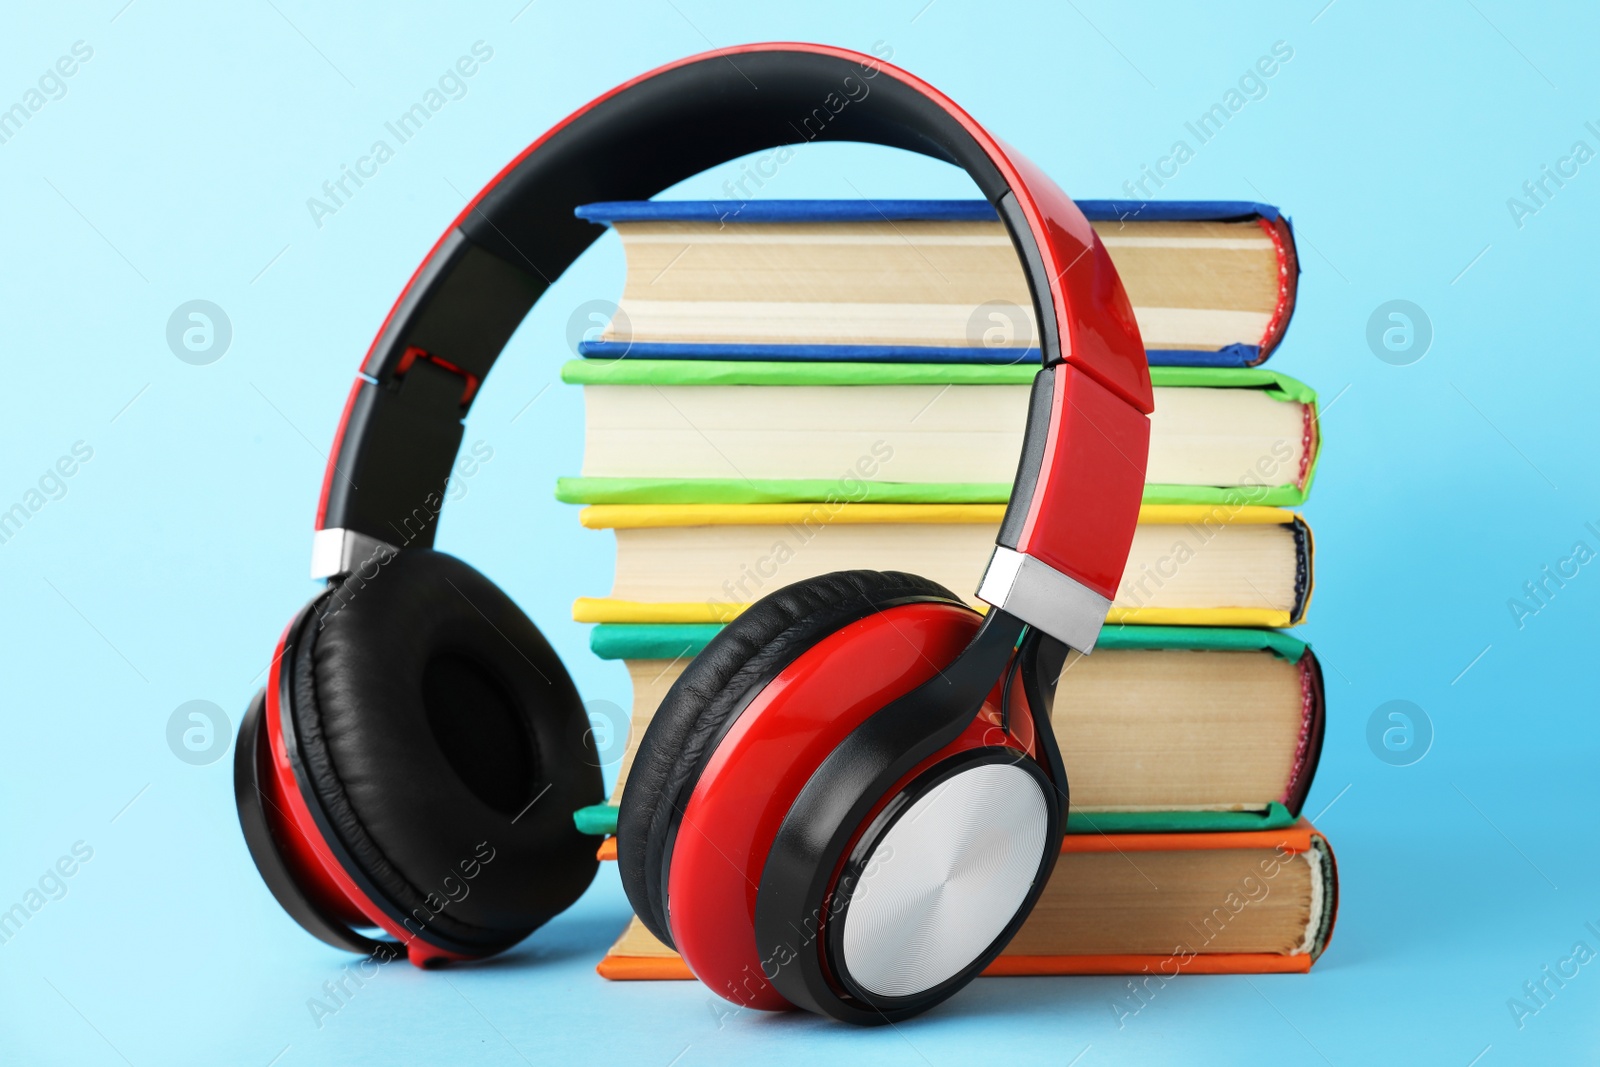 Photo of Books and modern headphones on light blue background